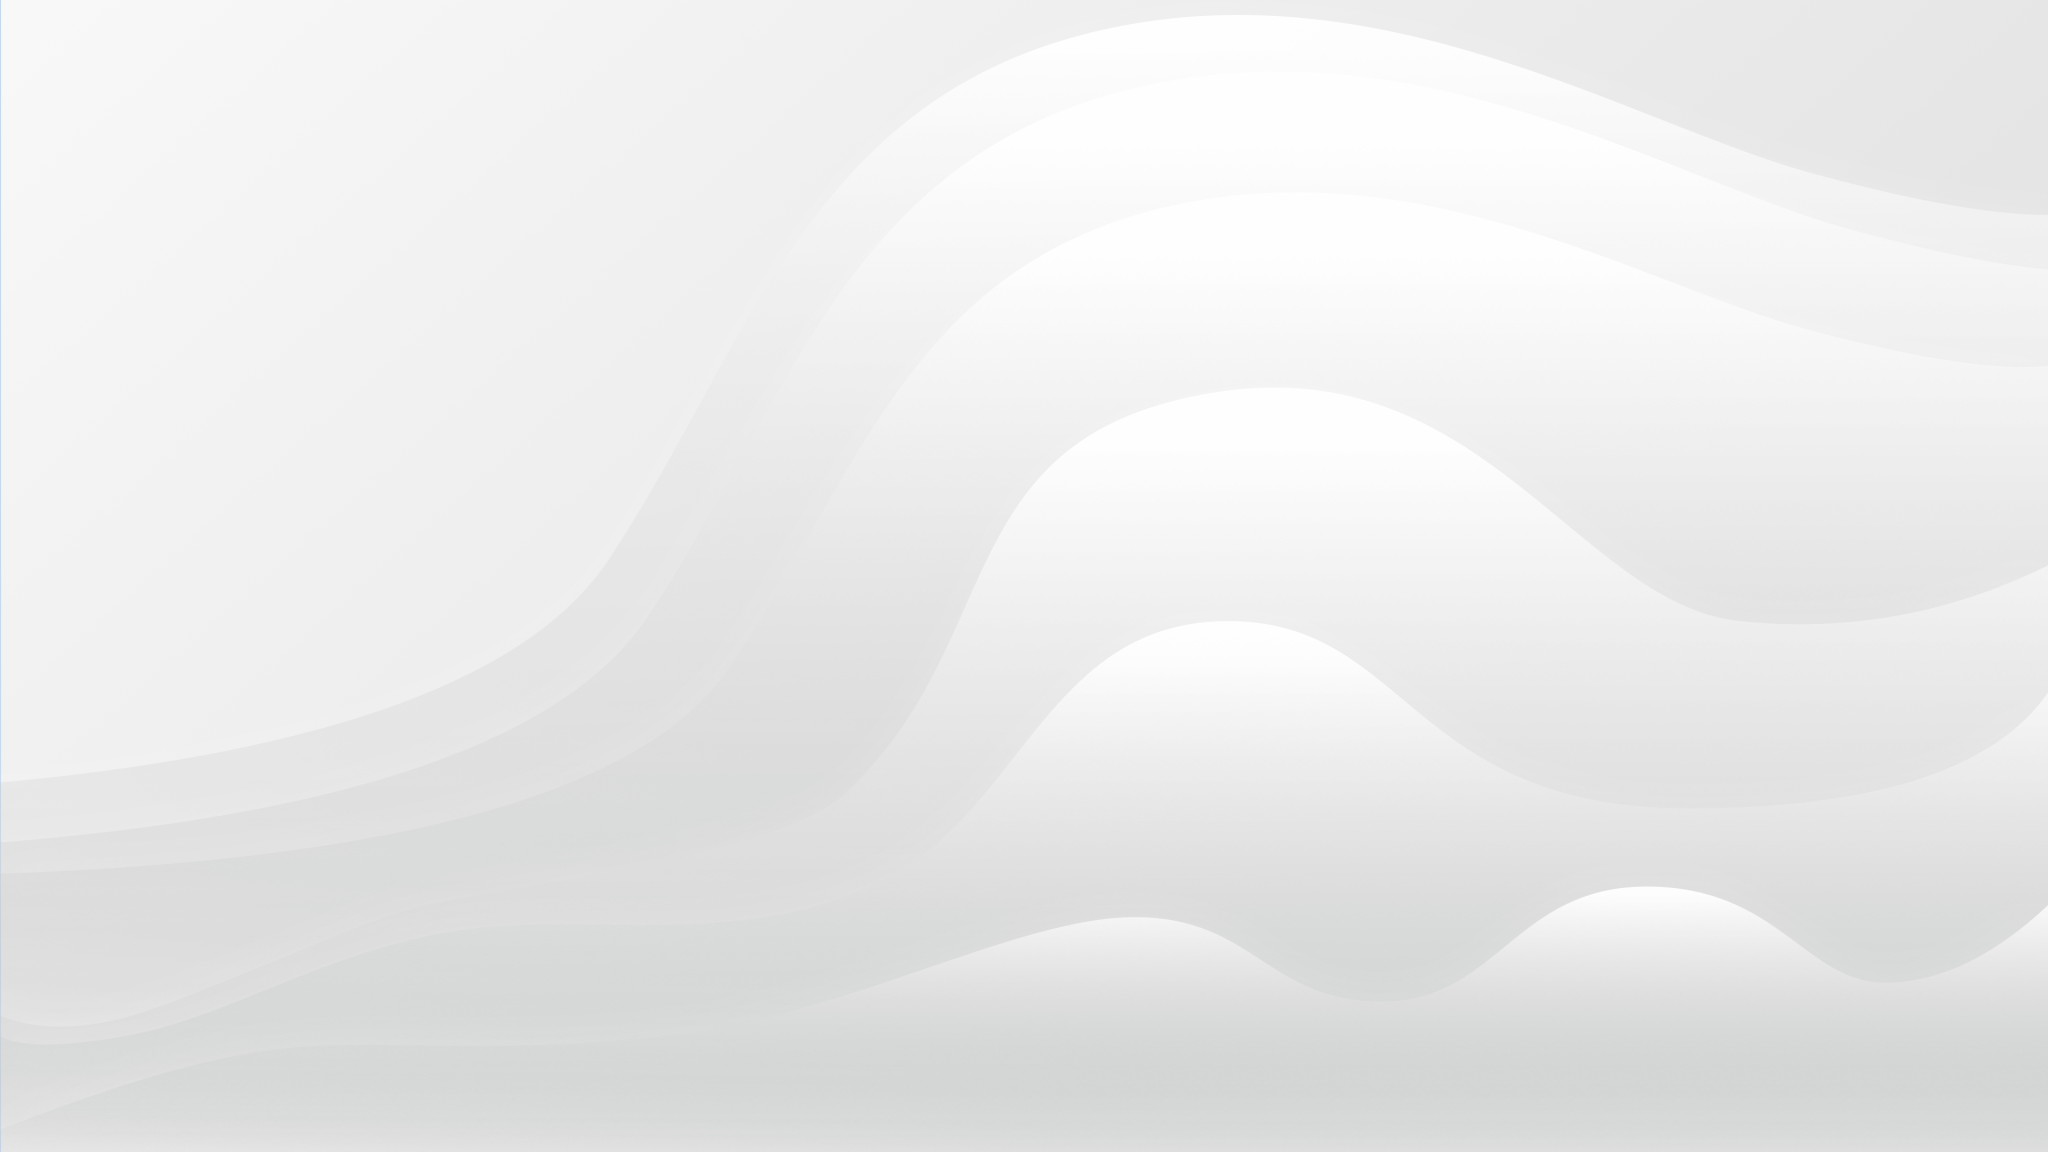 General 2048x1152 abstract wavy lines simple background minimalism